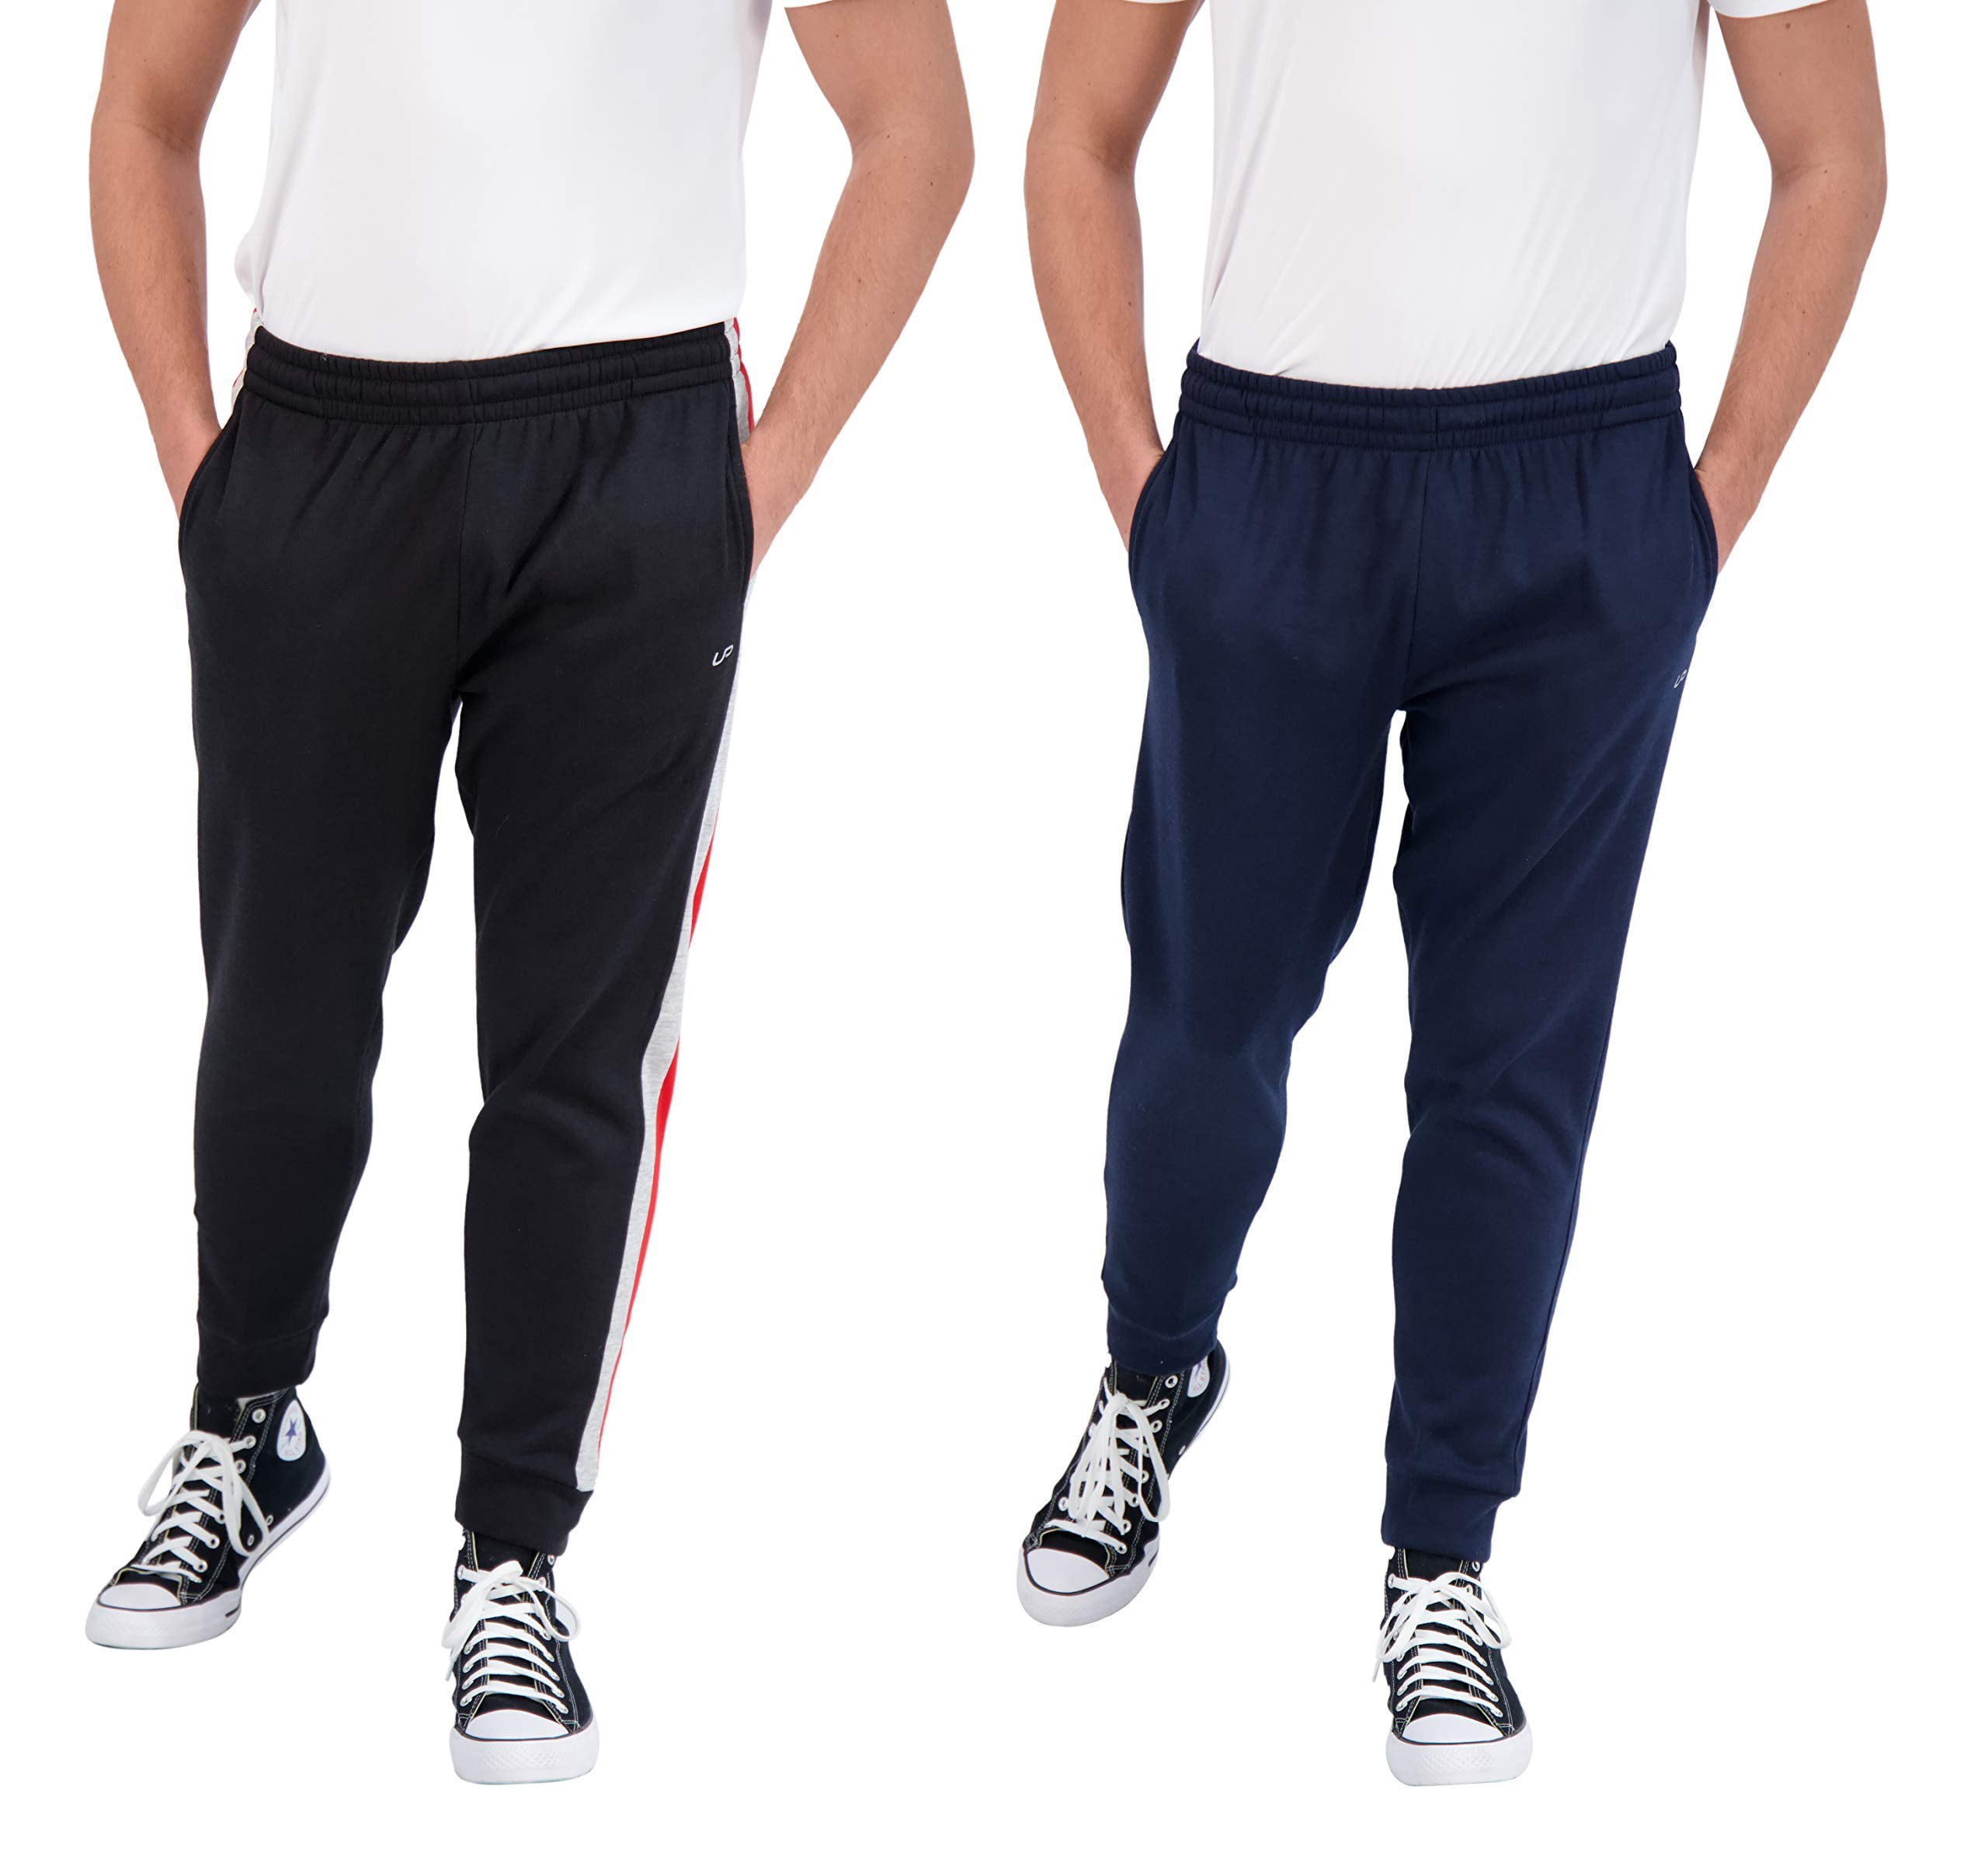 Unipro Mens 2-Pack Fleece Jogger Sweatpants Active Casual Athletic ...